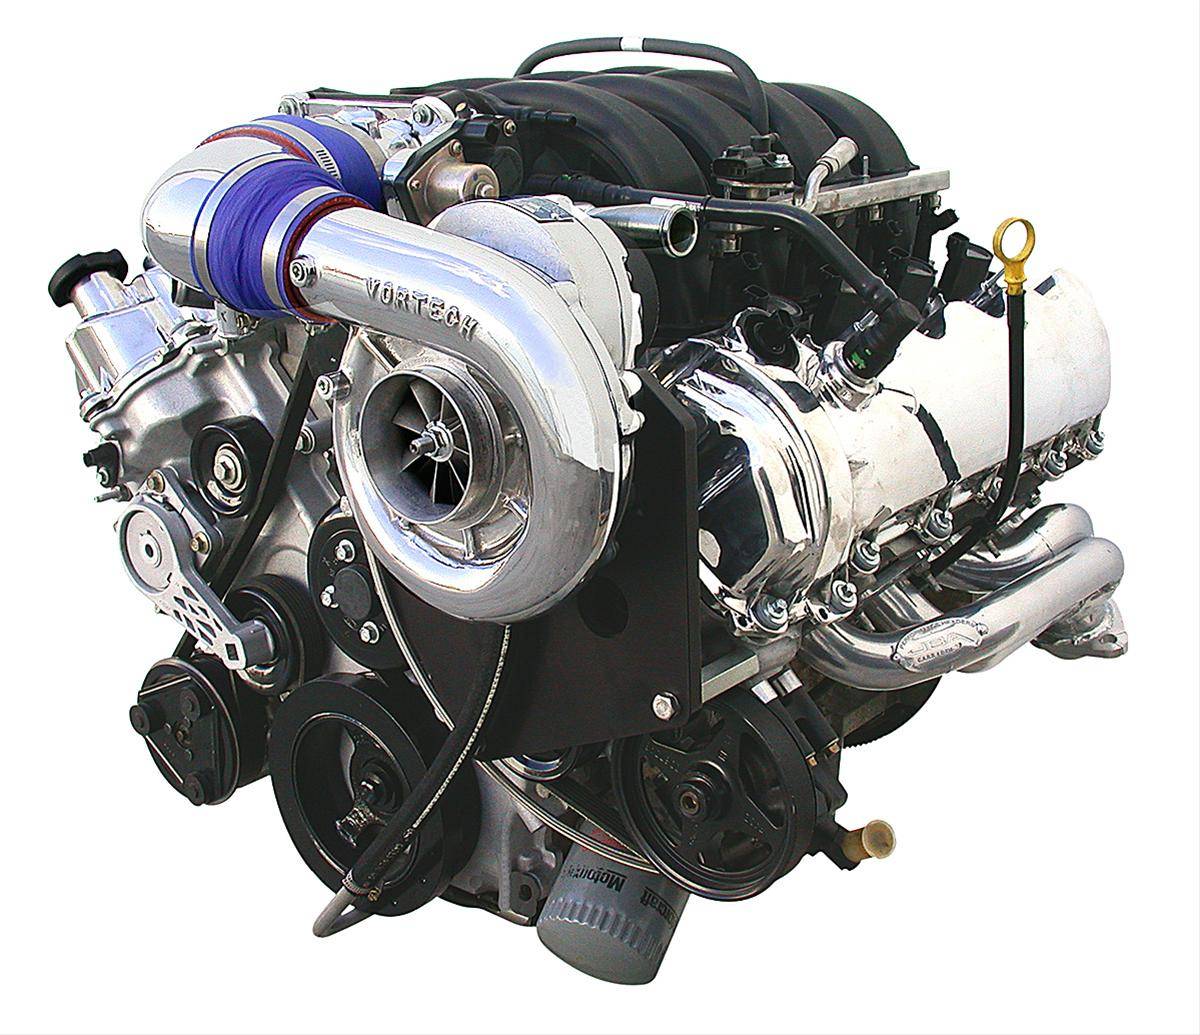 2008 Ford Mustang Gt Engine